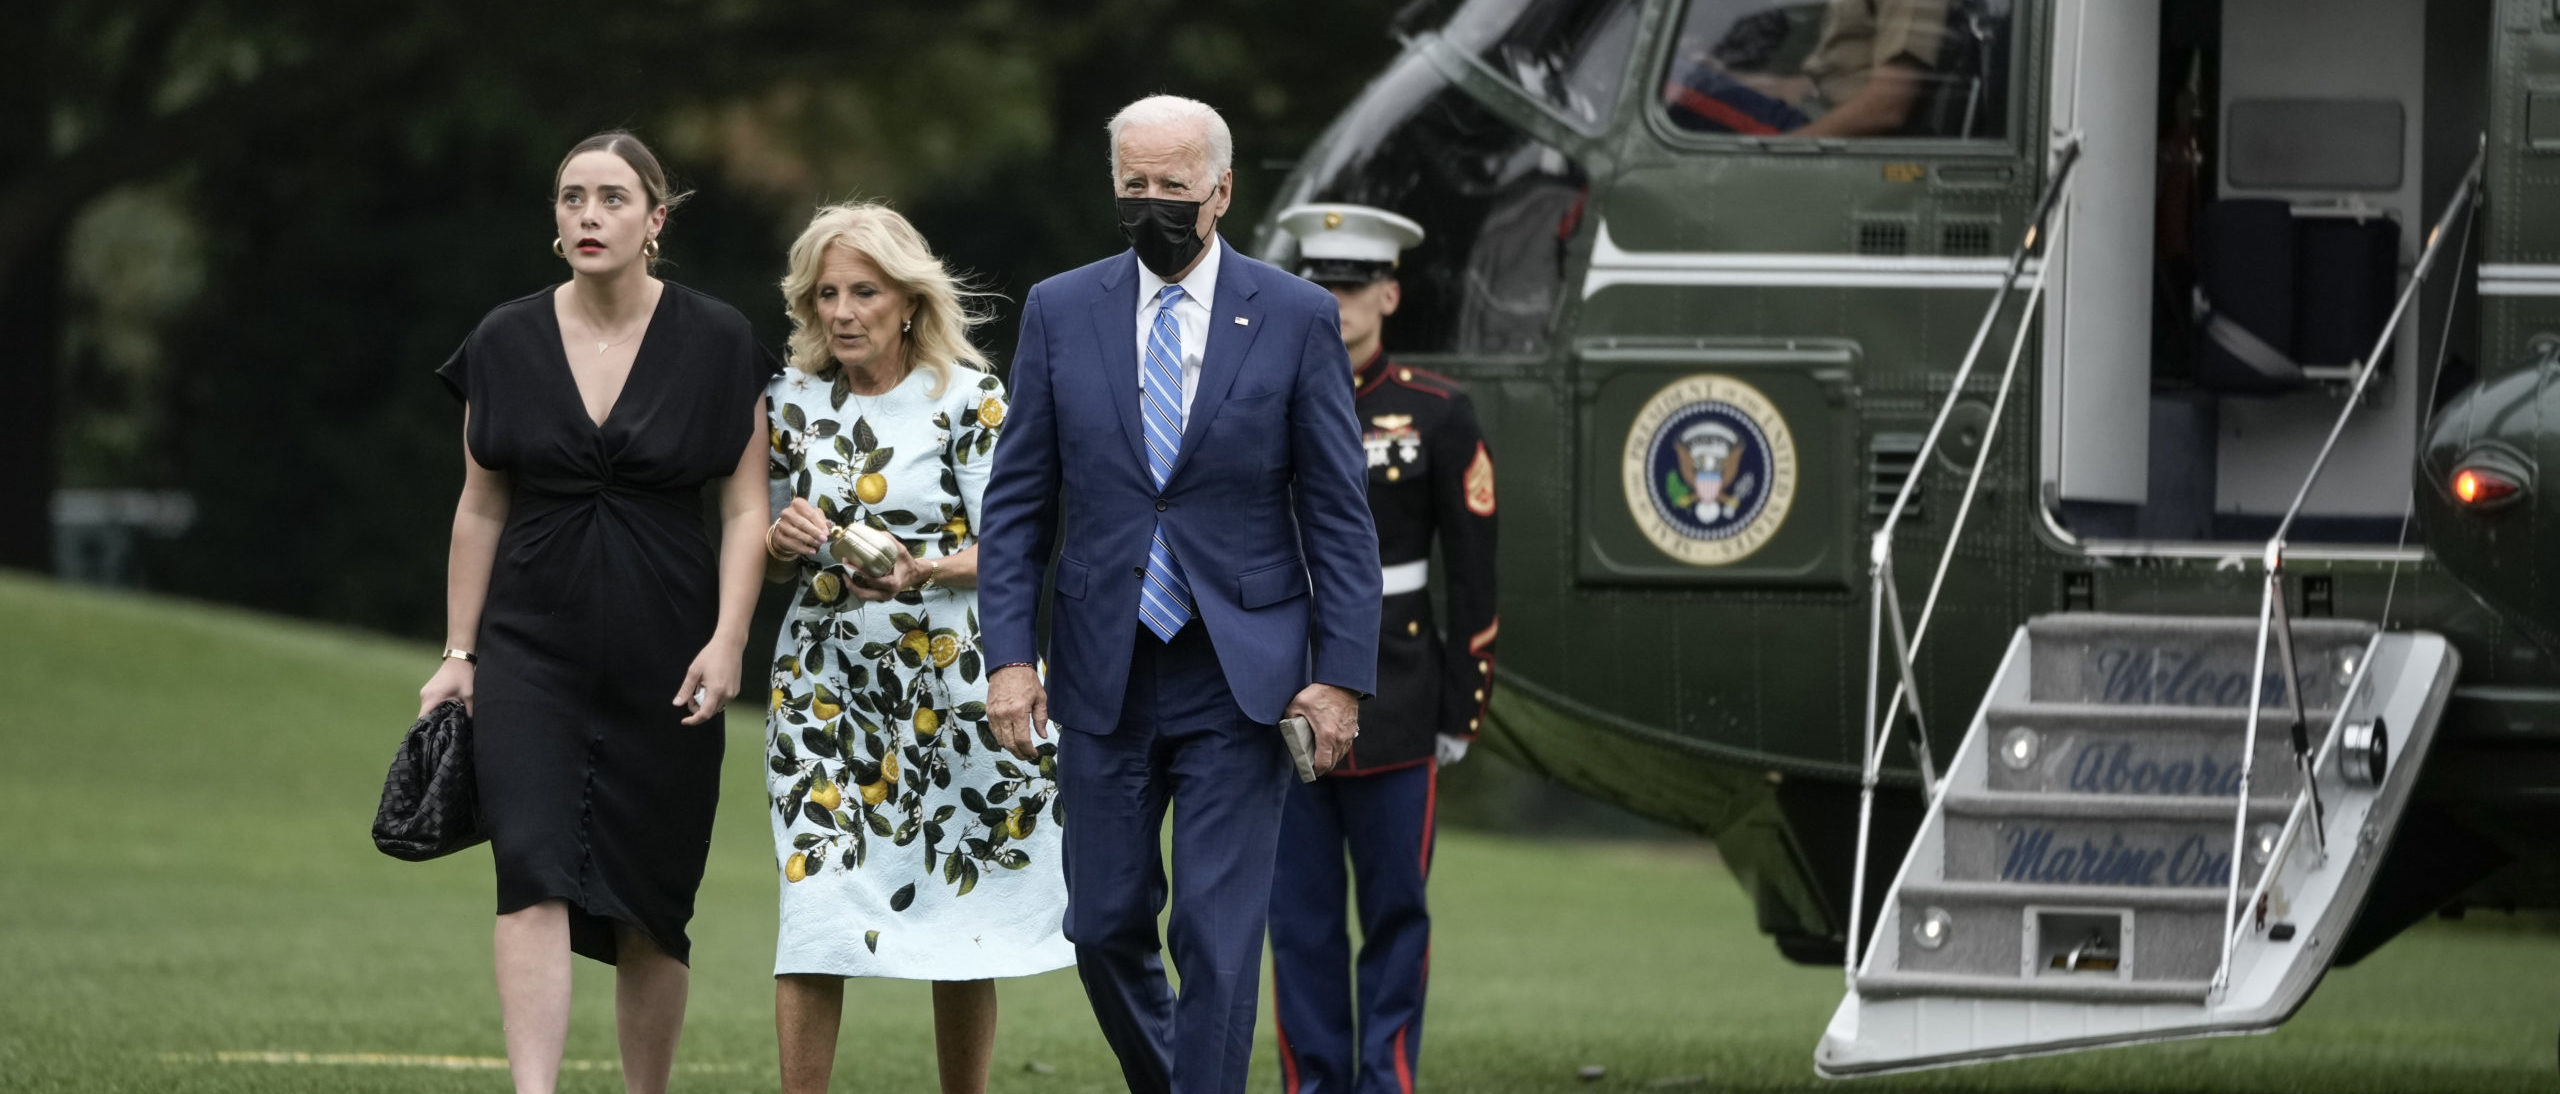 WASHINGTON, DC - OCTOBER 11: (L-R) Granddaughter Naomi Biden, U.S. President Joe Biden and first lady Jill Biden exit Marine One on the South Lawn of the White House October 11, 2021 in Washington, DC. (Photo by Drew Angerer/Getty Images)